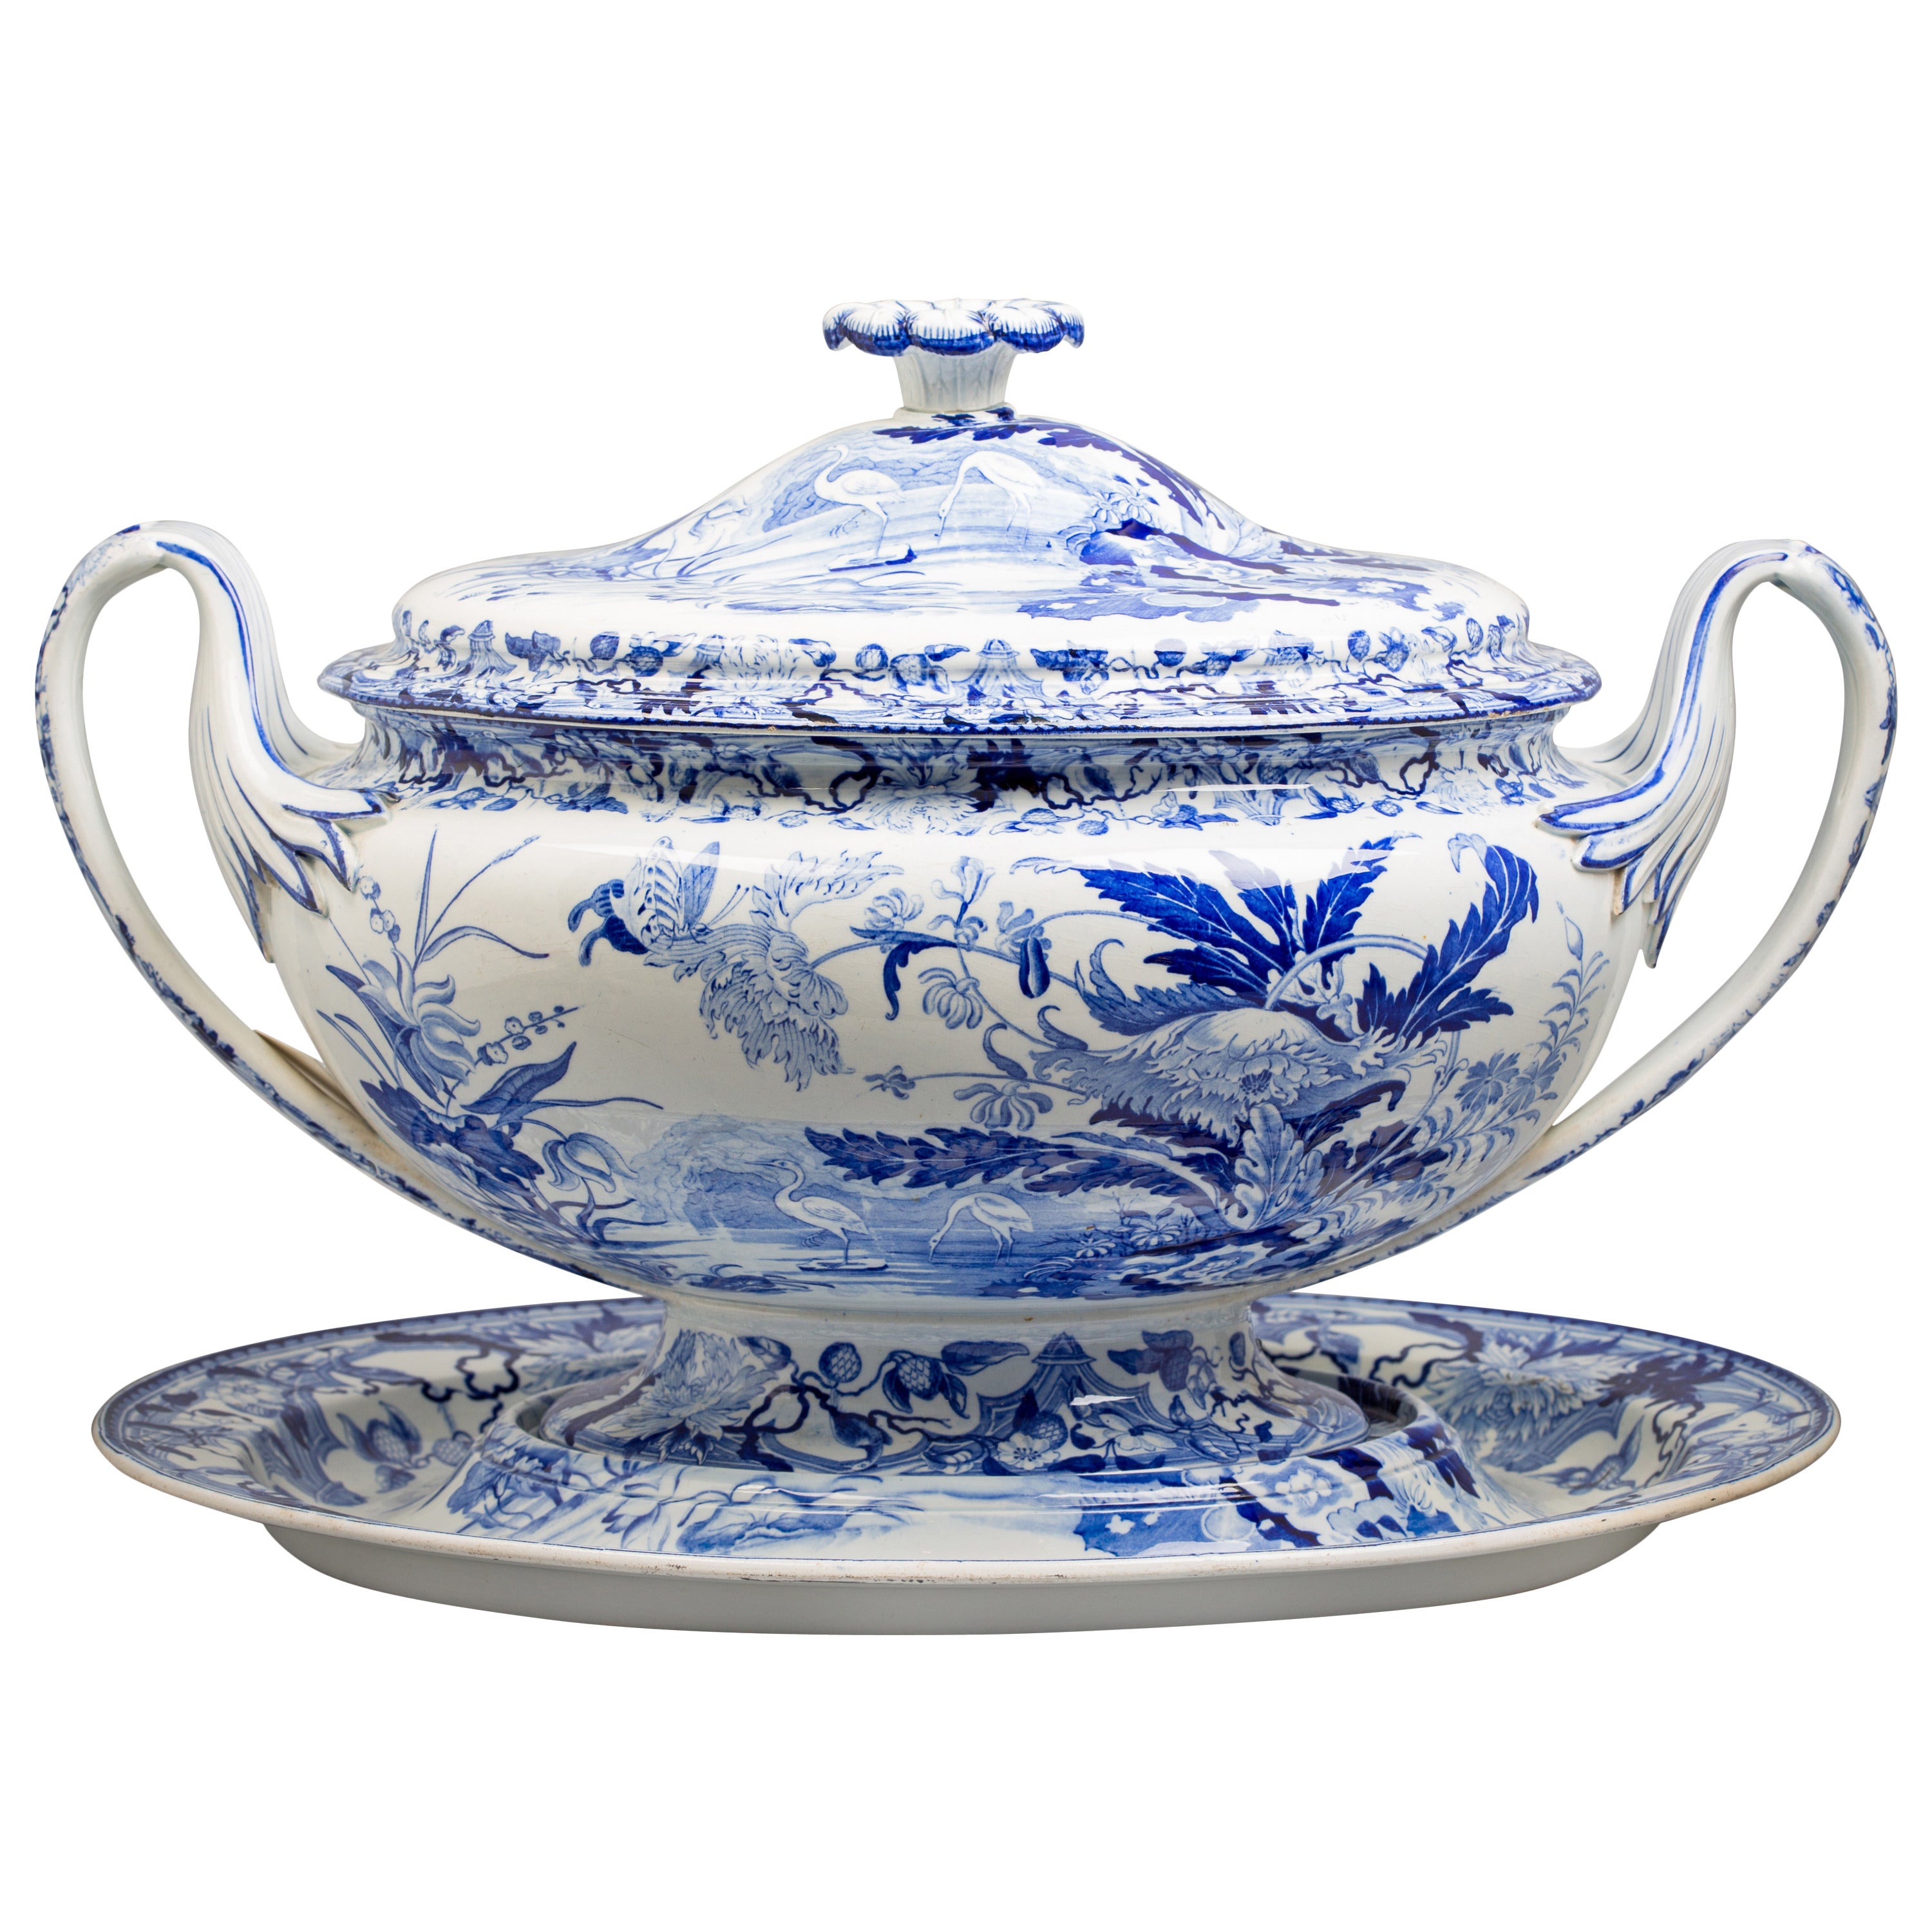 Wedgwood Pearlware Blue and  White Covered Tureen and Stand, circa 1830